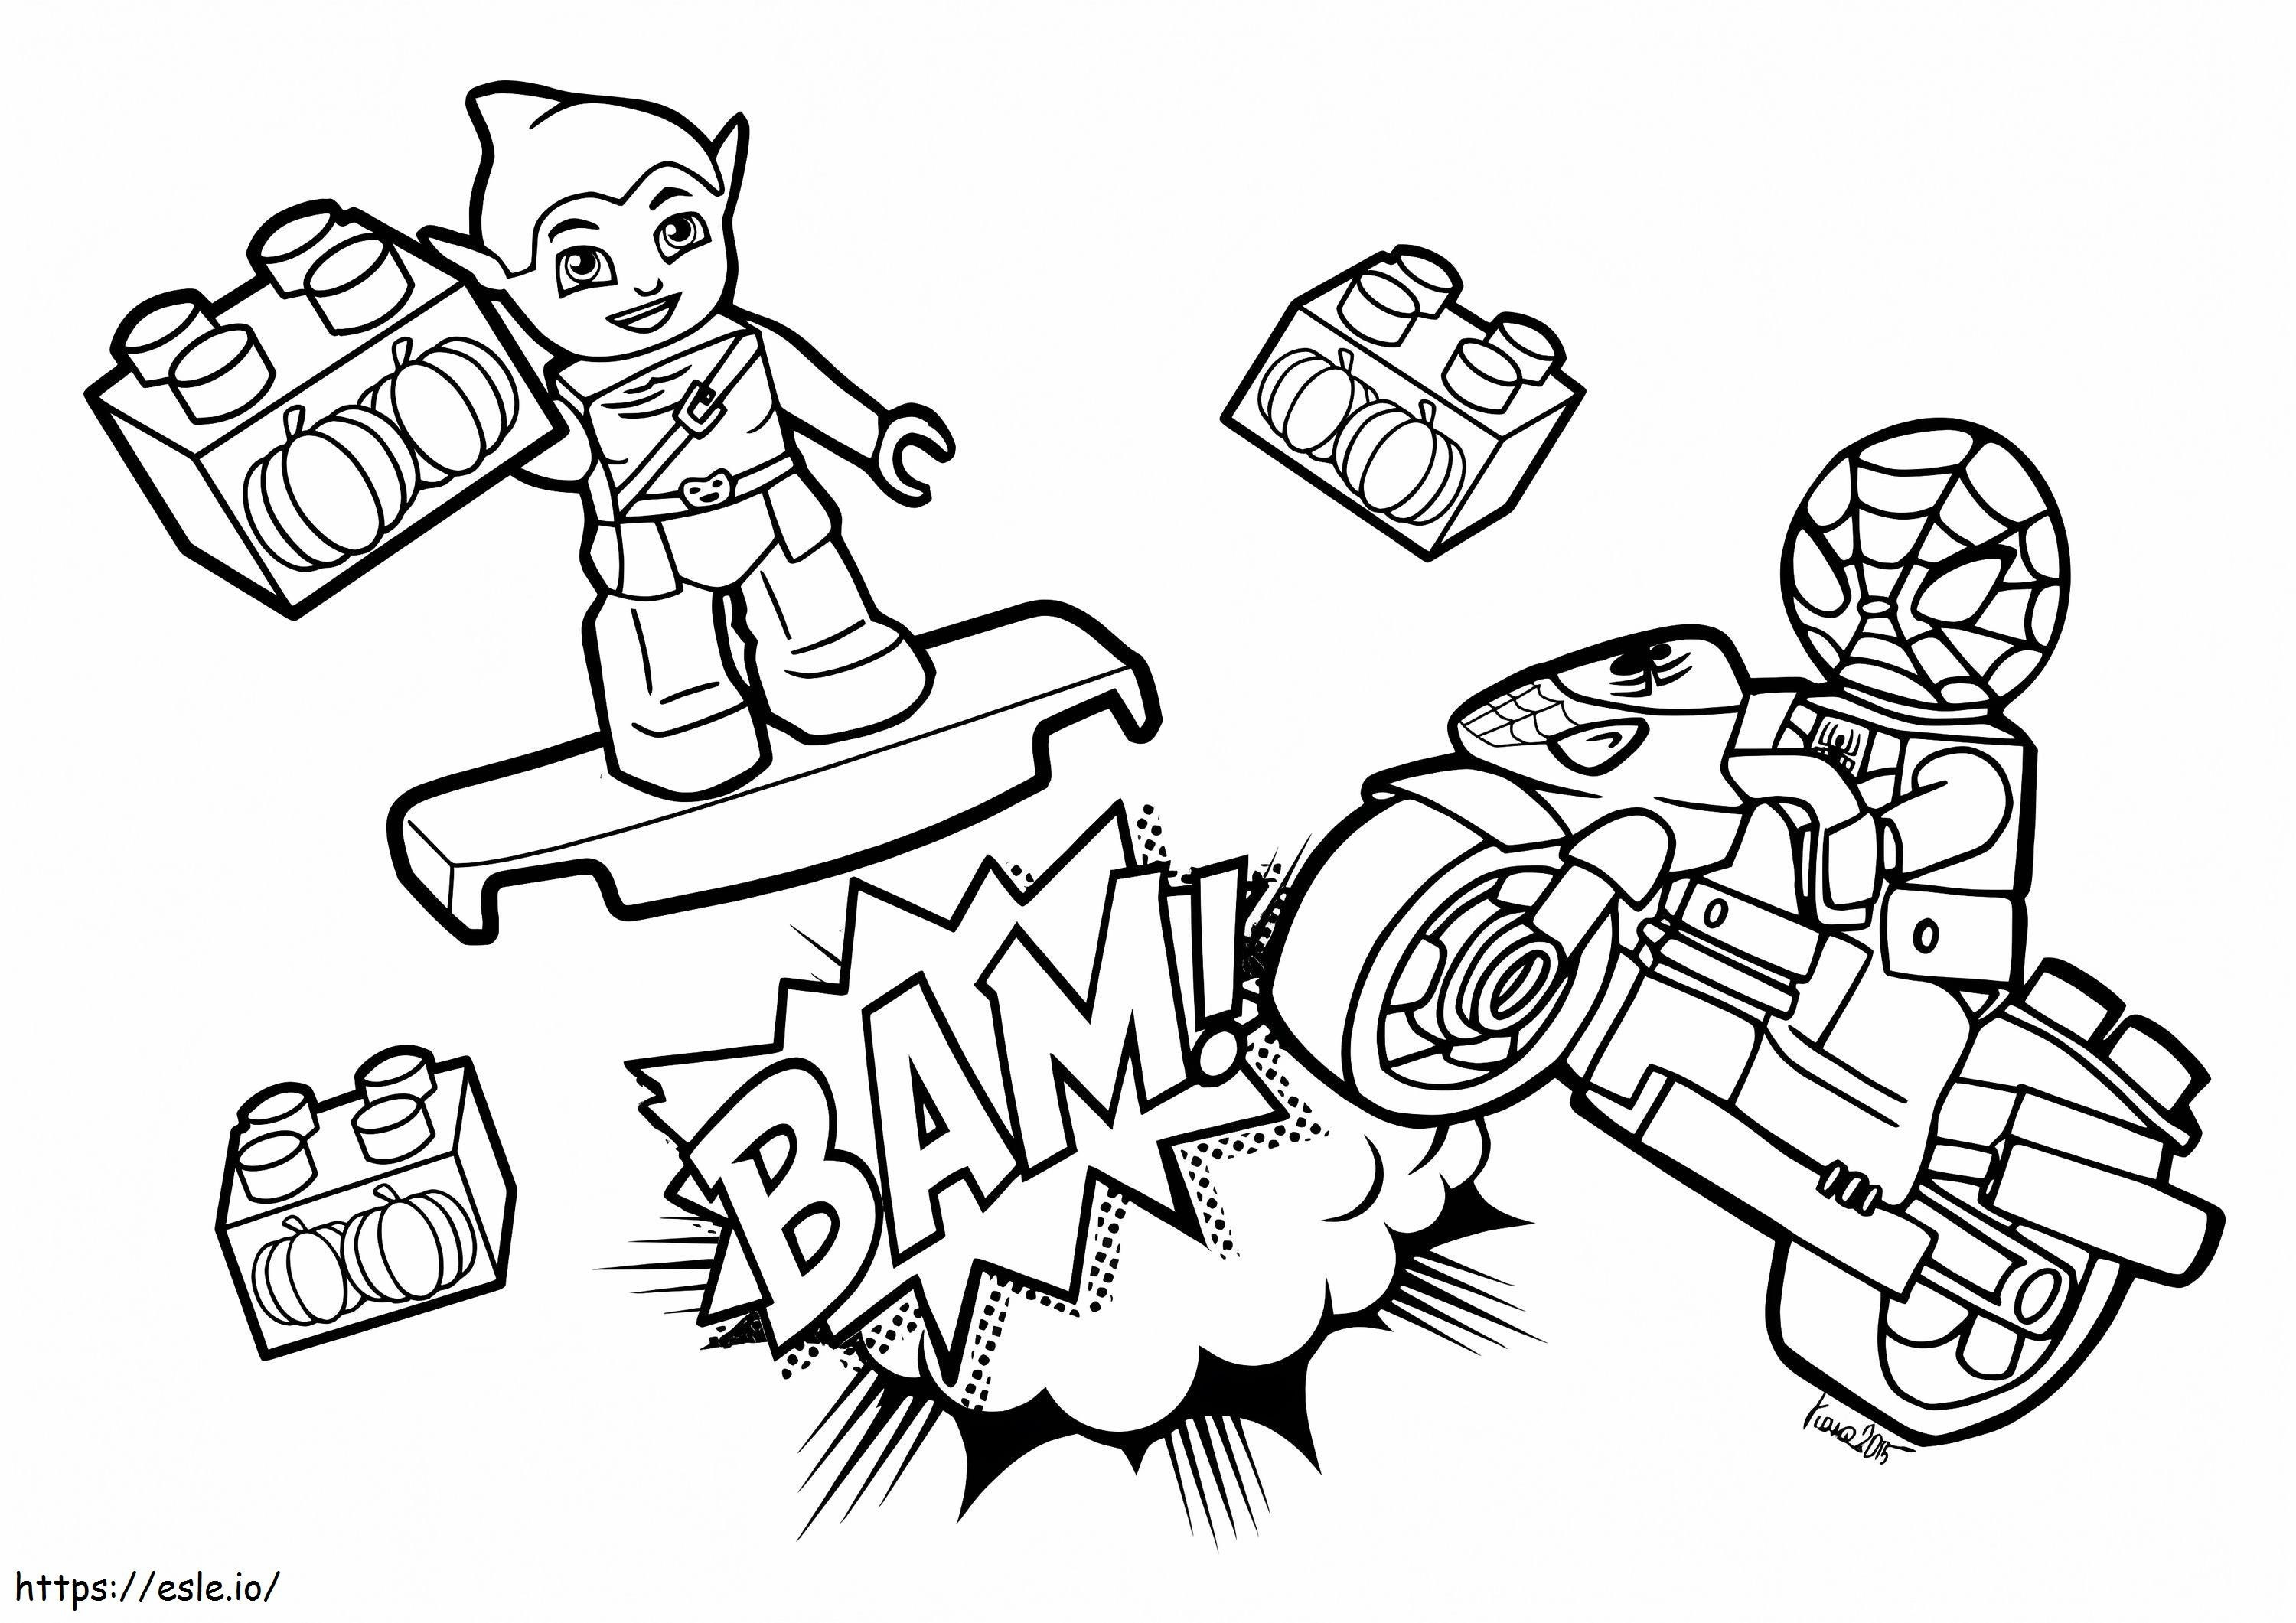 Funny Lego Spiderman coloring page